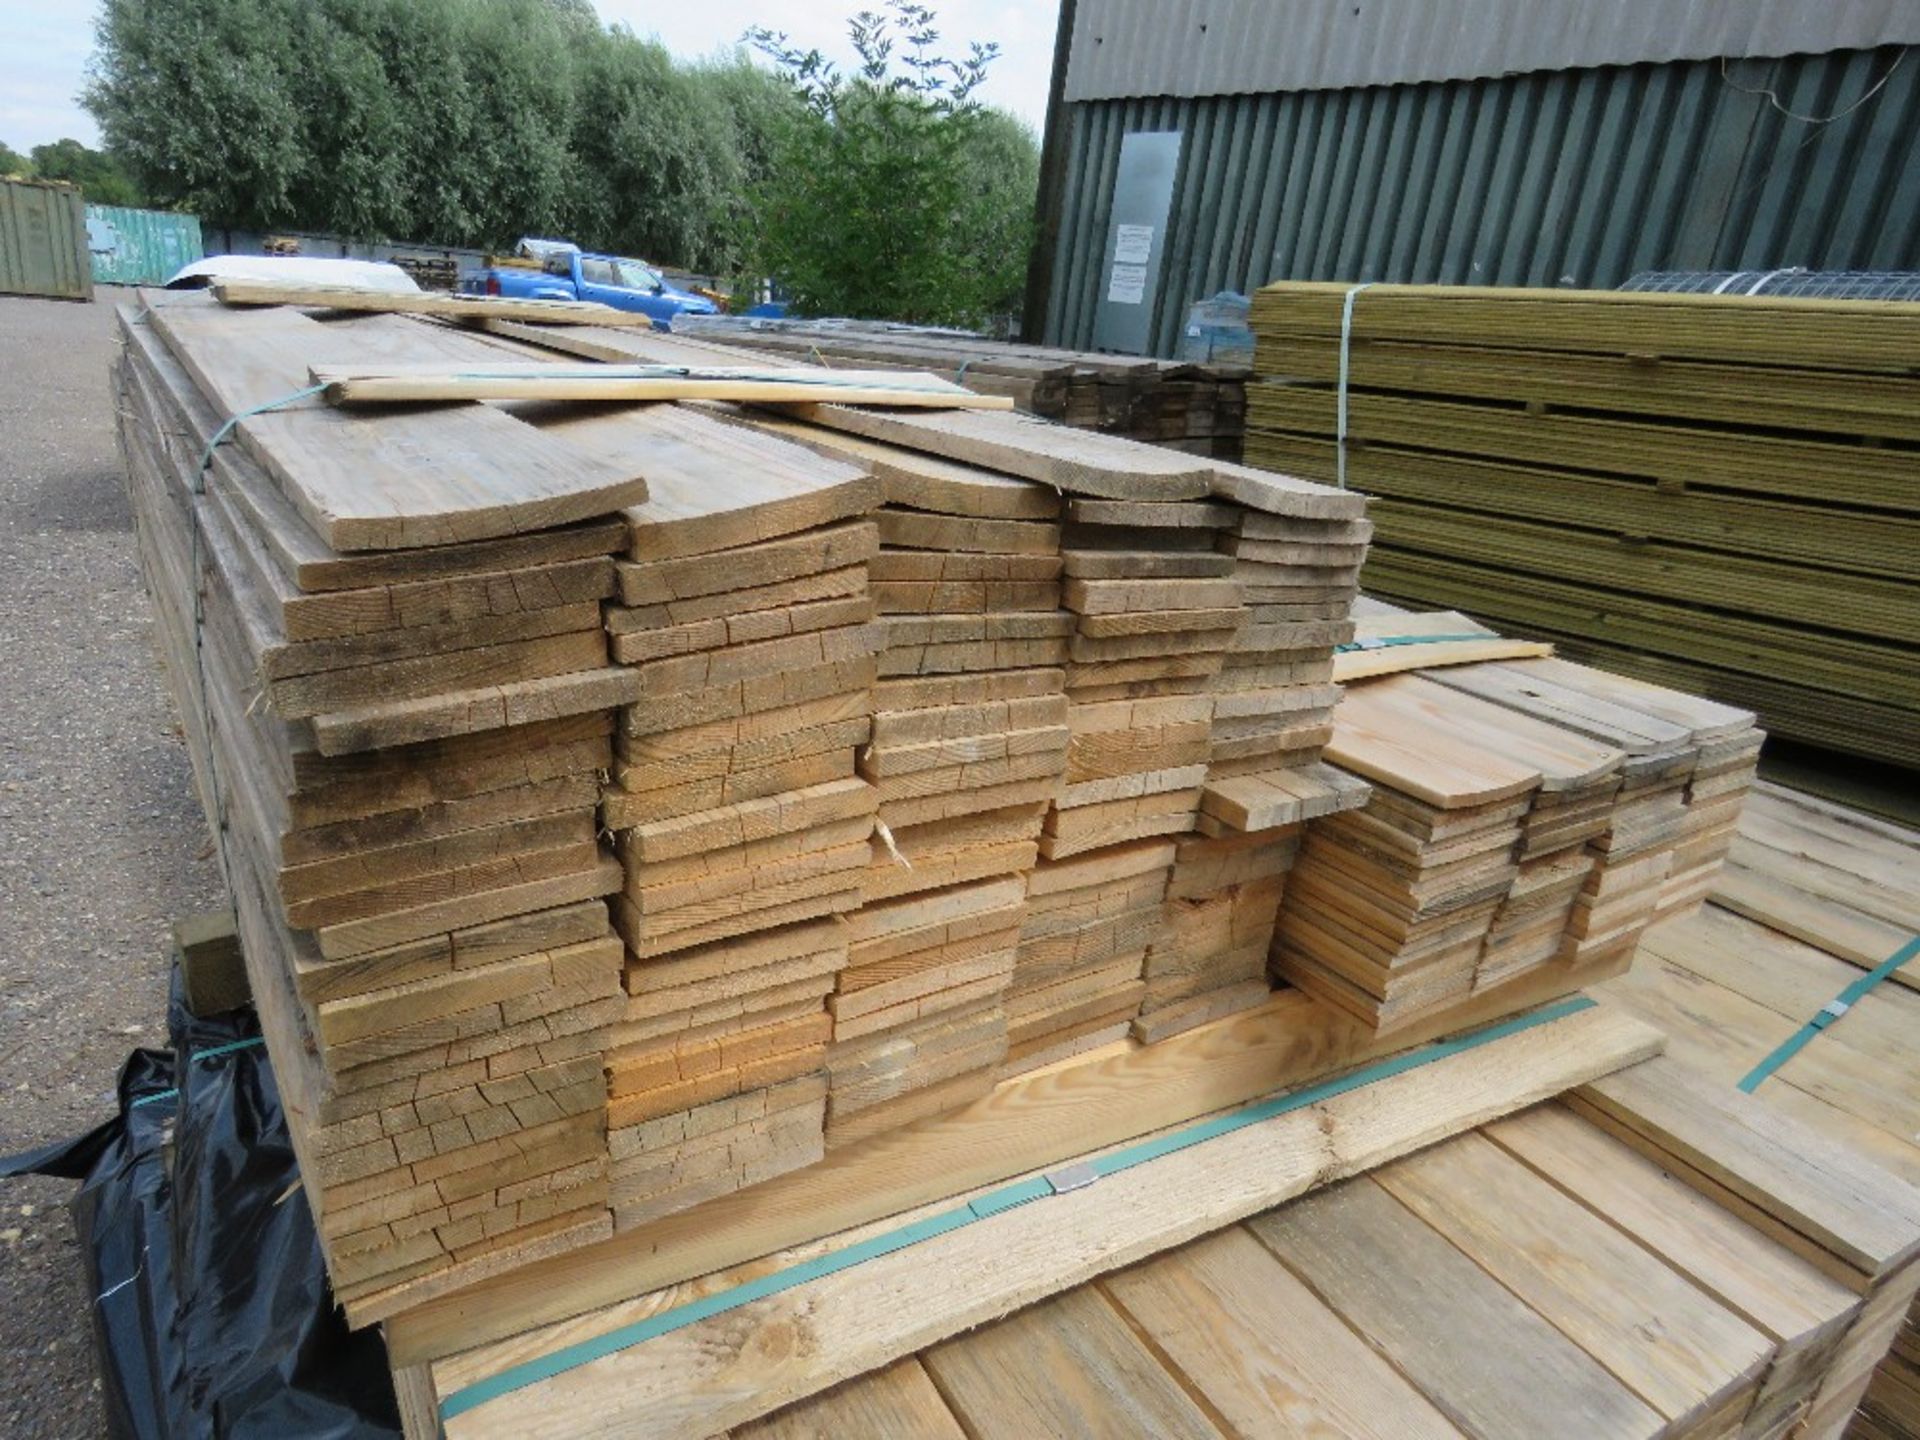 STACK CONTAINING 4 BUNDLES OF UNTREATED FENCE CLADDING TIMBER BOARDS, 1.14M -1.73M LENGTHAPPROX. - Image 2 of 6